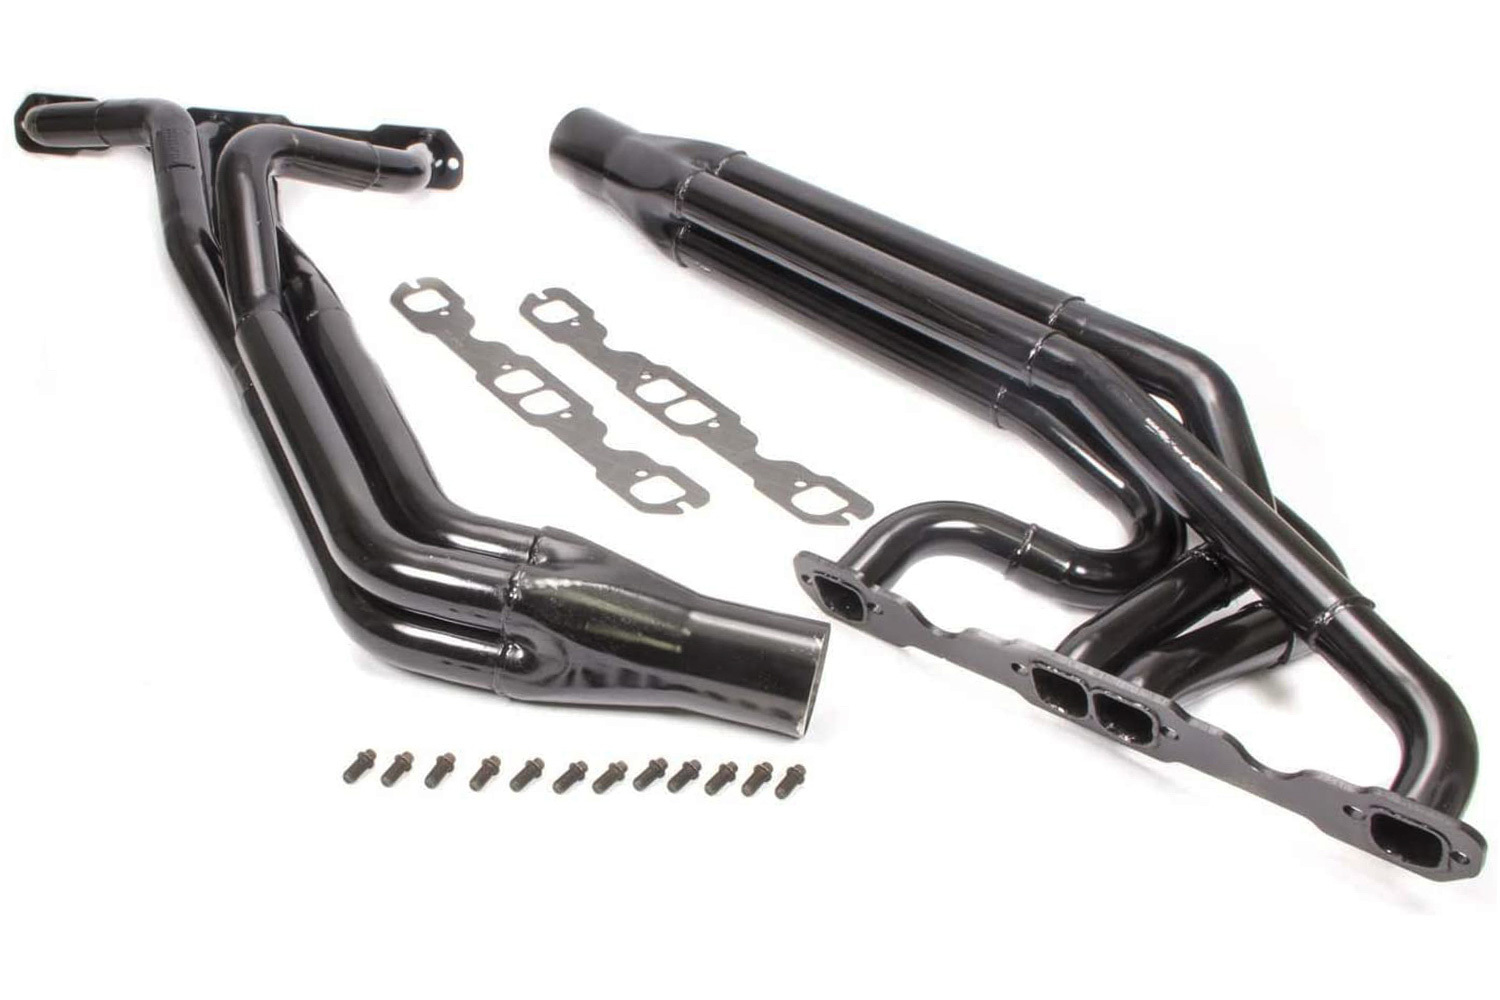 Schoenfeld Headers 180-606LV23GCM-3 - Headers, Dirt Late Model, 1-1/2 to 1-7/8 in Primary, 3 in Collector, Steel, Black Paint, Small Block Chevy, Kit